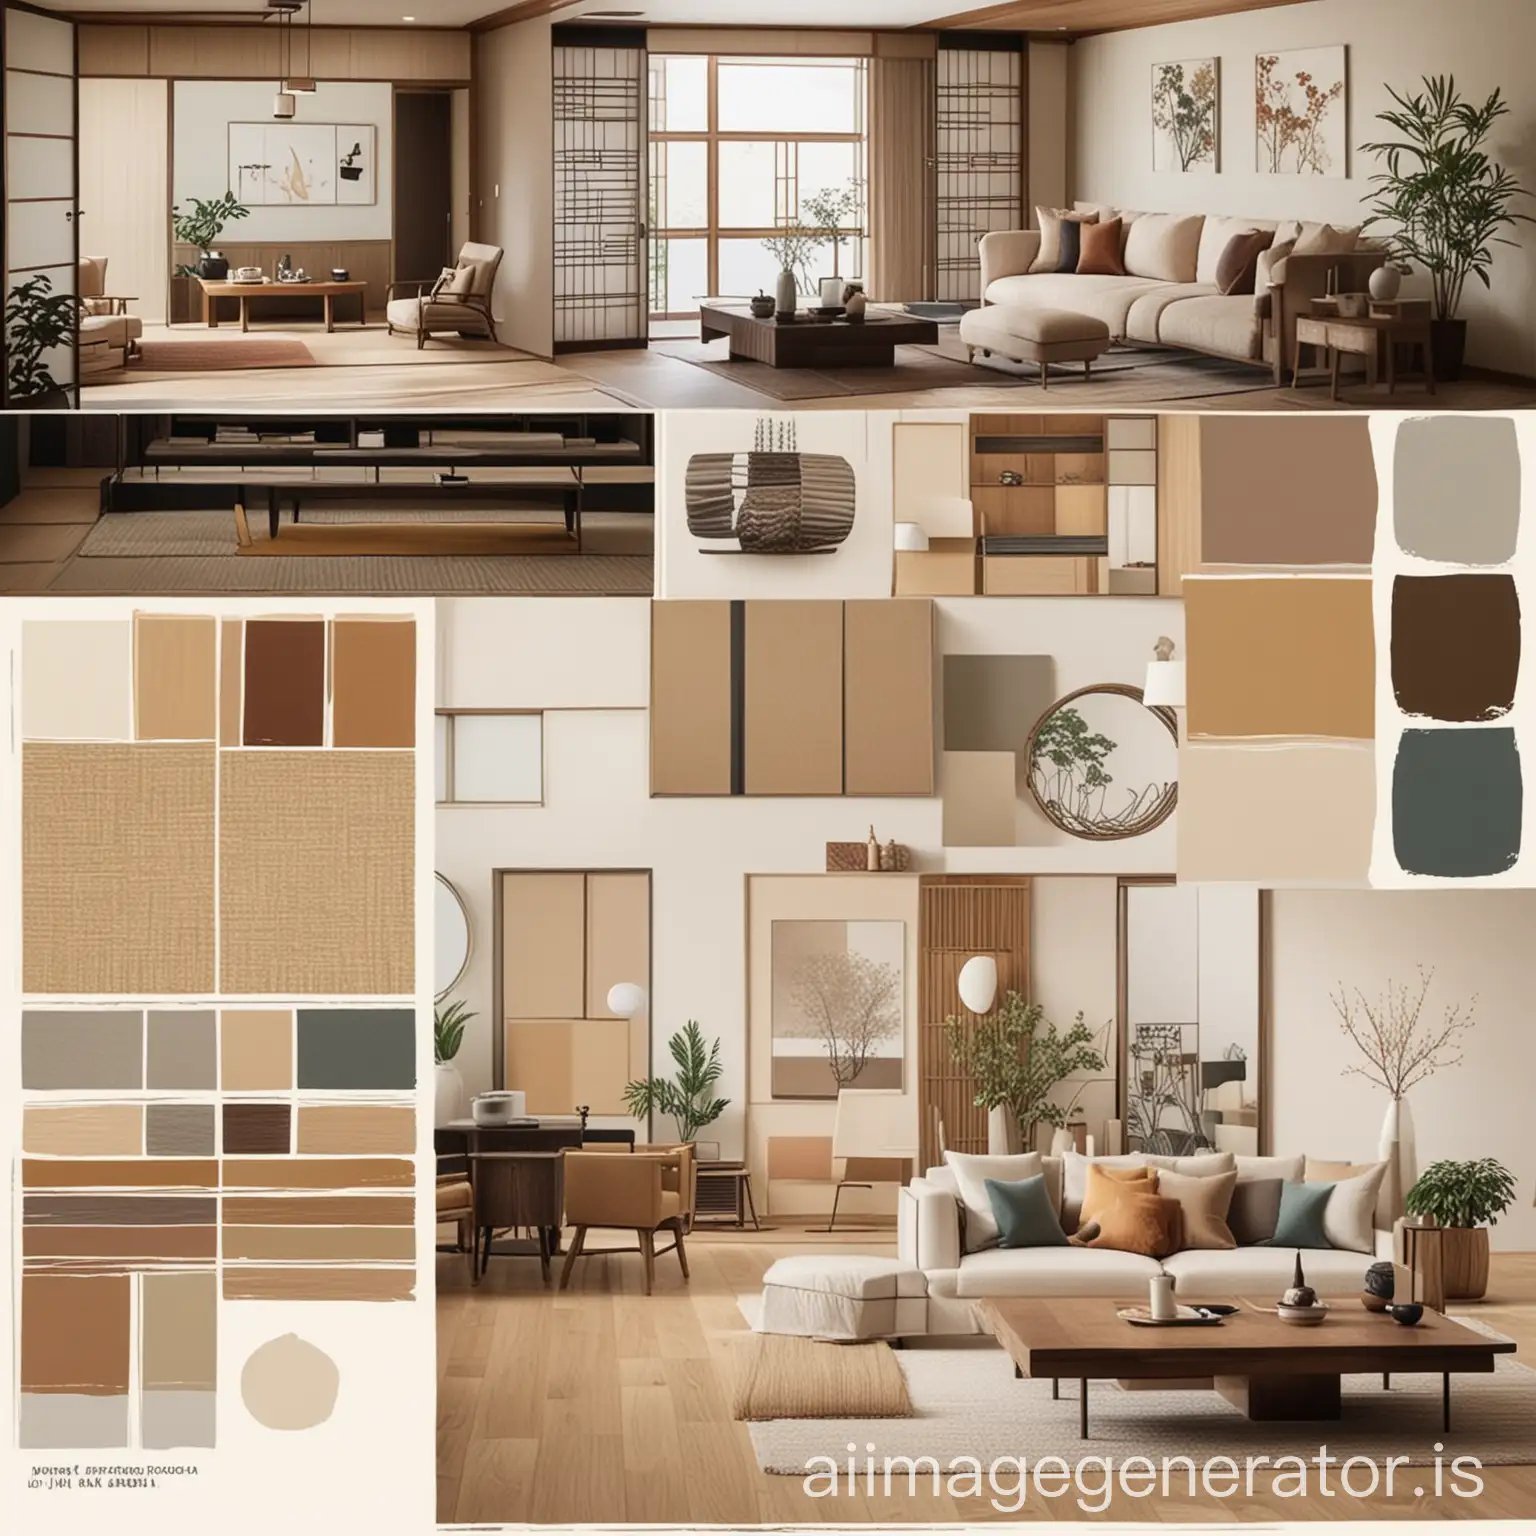 Japanese-Interior-Style-Mood-Board-Reception-Hall-and-Living-Room-with-Harmonious-Color-Palette